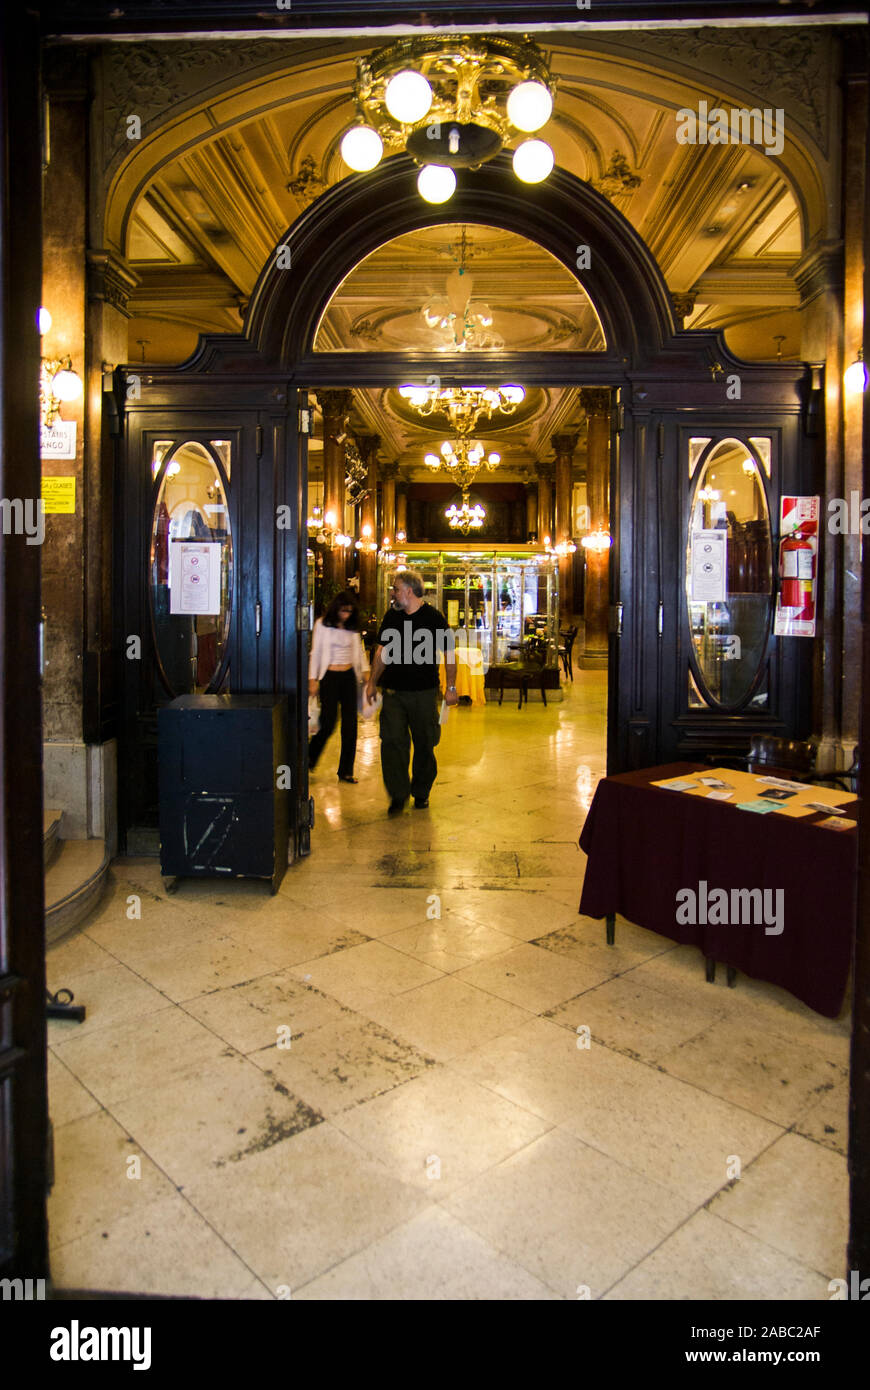 BUENOS AIRES, ARGENTINA-APRIL 8: confiteria ideal is a famous bar in the avenida de mayo opened in the 1894, the oldest in town,on the 8th april 2008 Stock Photo